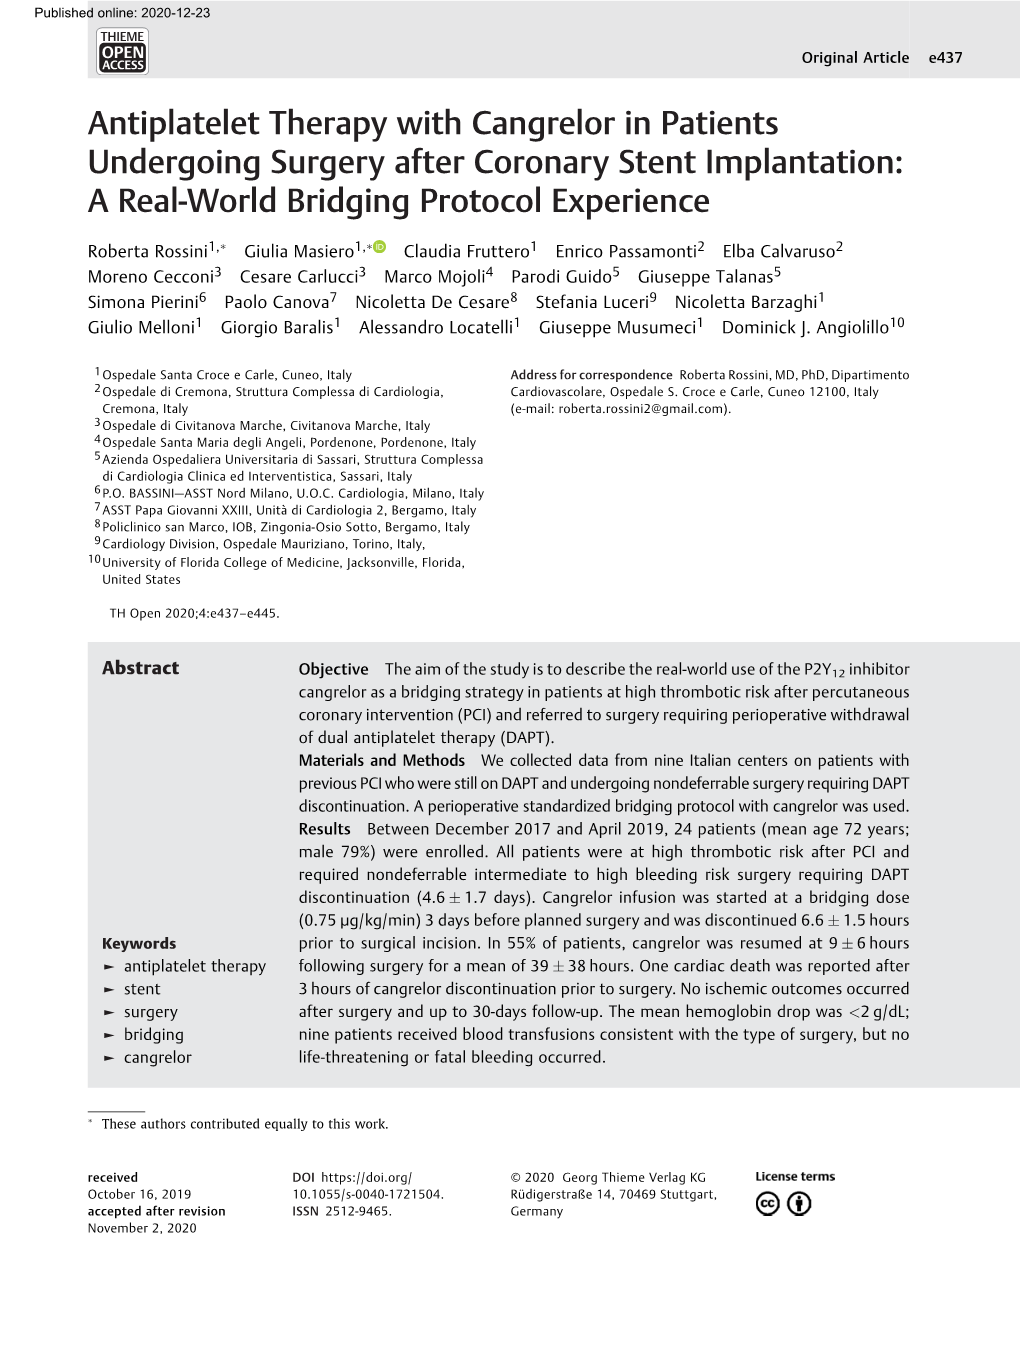 Antiplatelet Therapy with Cangrelor in Patients Undergoing Surgery After Coronary Stent Implantation: a Real-World Bridging Protocol Experience